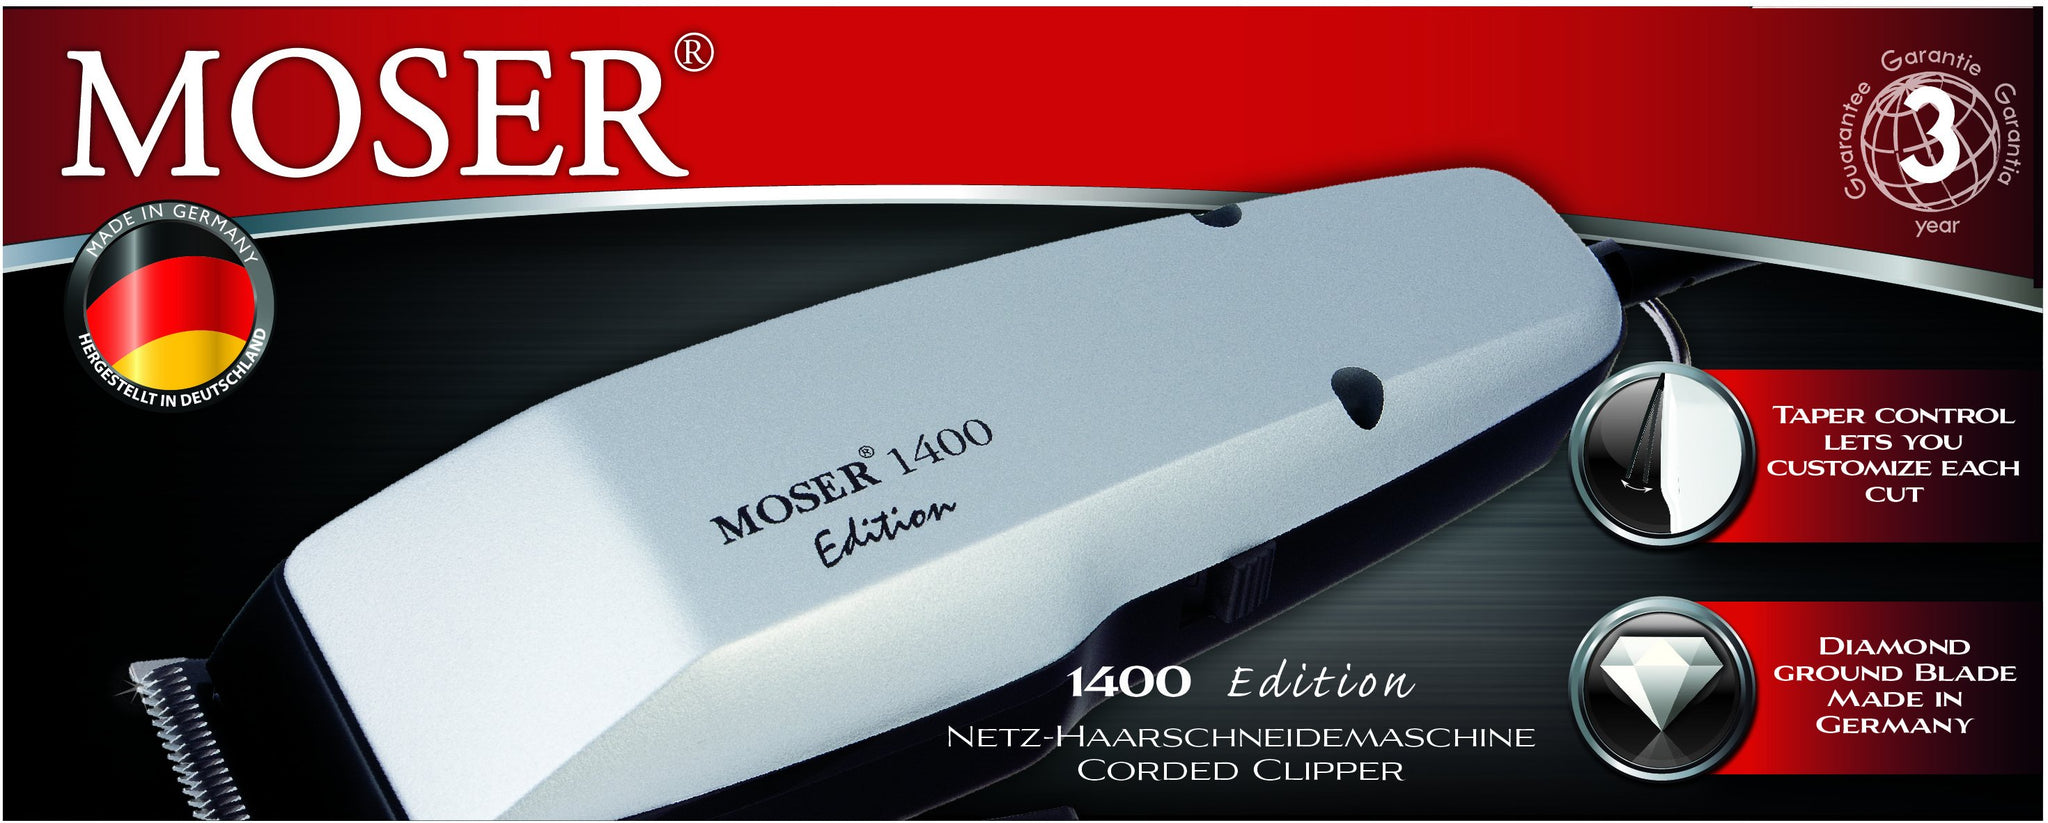 MOSER 1400 – the original, Made in Germany since 1962